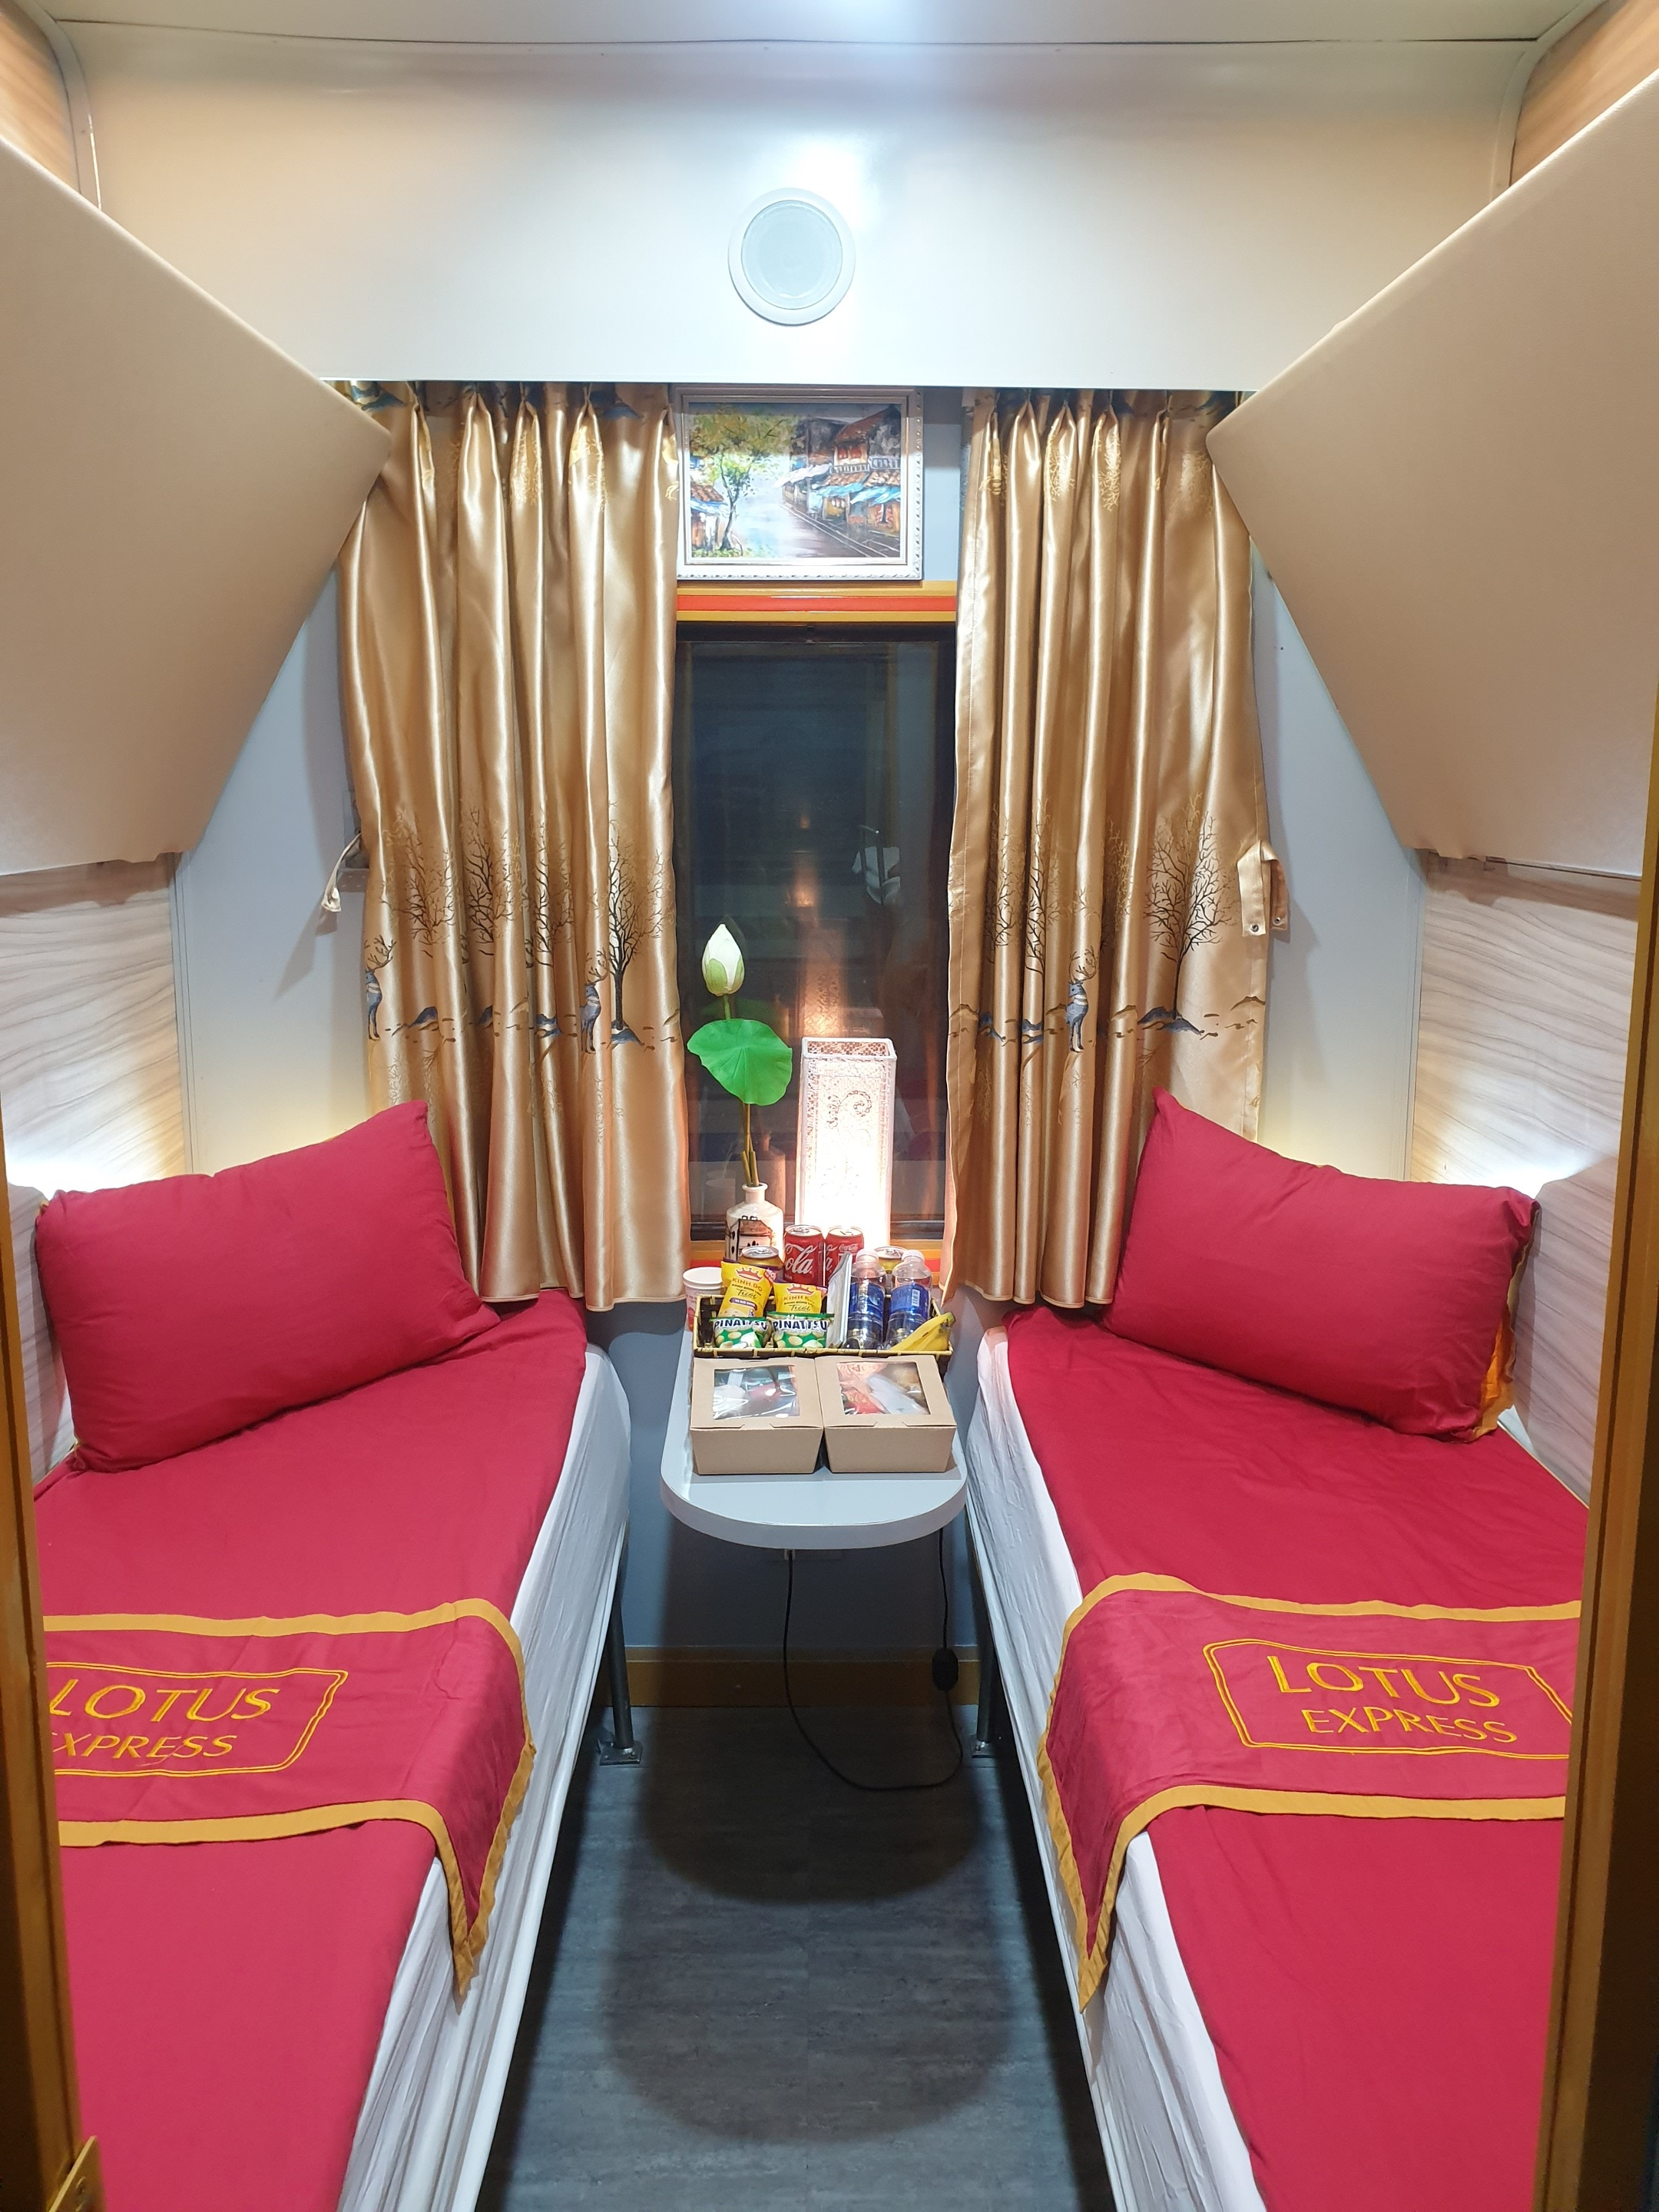 Dong Hoi - Ninh Binh VIP 2 berth on SE20 (23h51 – 08h59) must book 2 tickets even you are solo traveler (VIP 2 Sleepers, One Way)